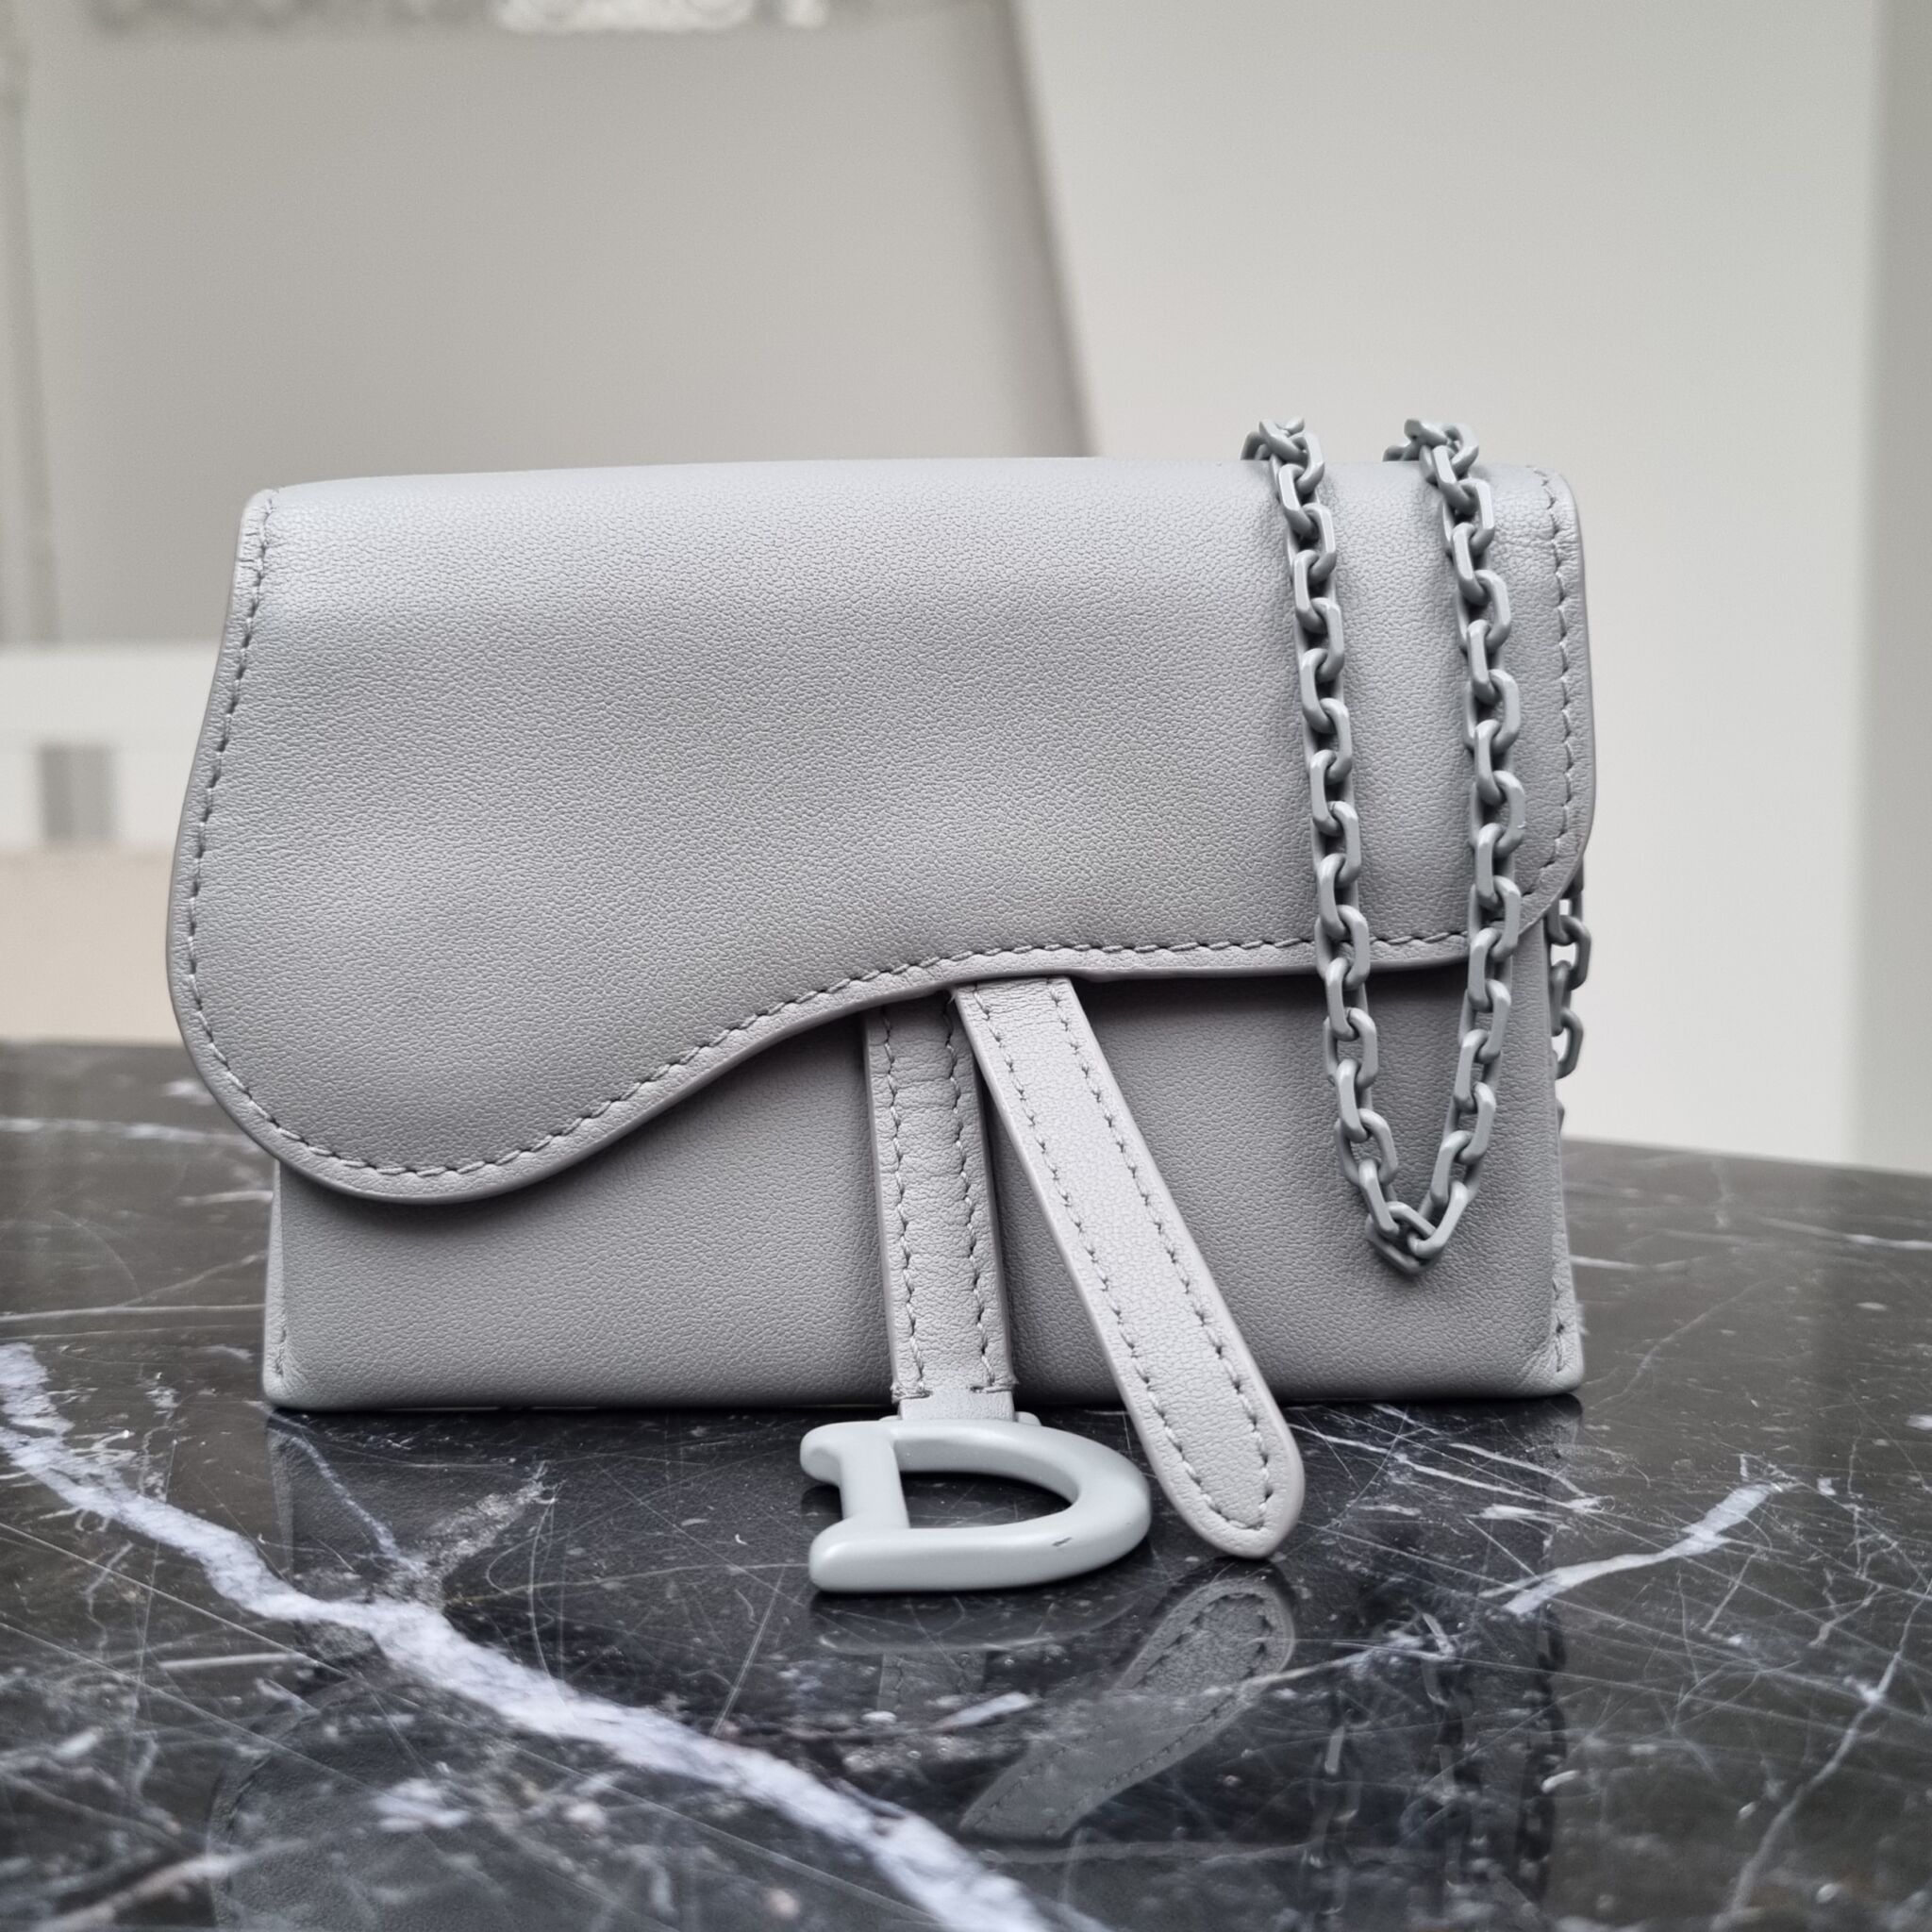 DIOR MINI SADDLE BAG, WHATS IN MY BAG + IS IT WORTH IT?, LUXURY UNBOXING